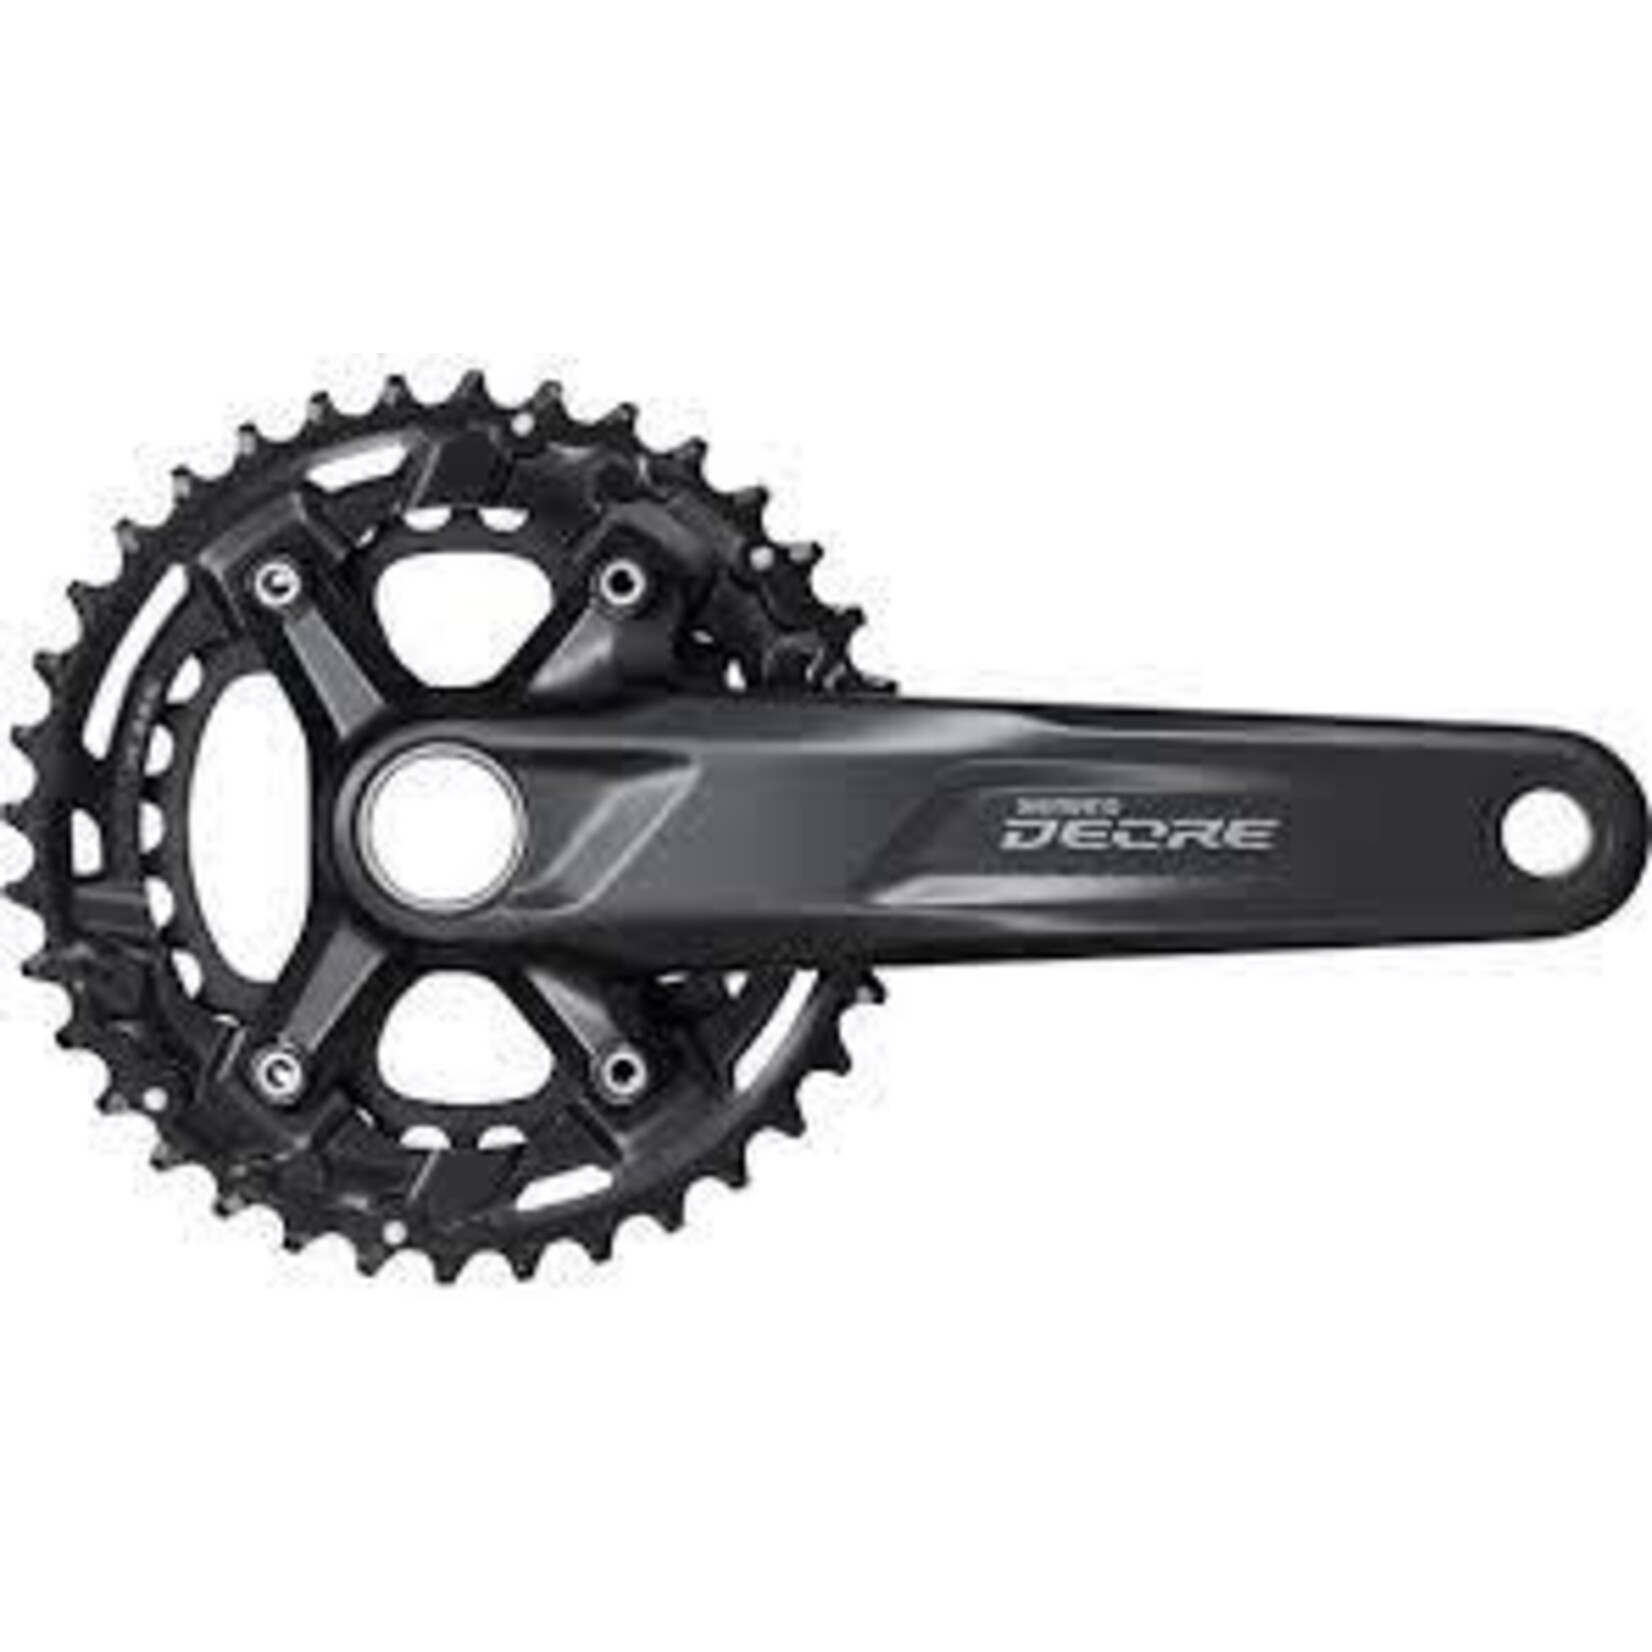 Shimano FRONT CHAINWHEEL, FC-M5100-2, DEORE, FOR REAR 11-SPEED, 2-PCS FC, 175MM, 36-26T W/O CG, W/O BB PARTS, FOR CHAIN LINE 48.8MM